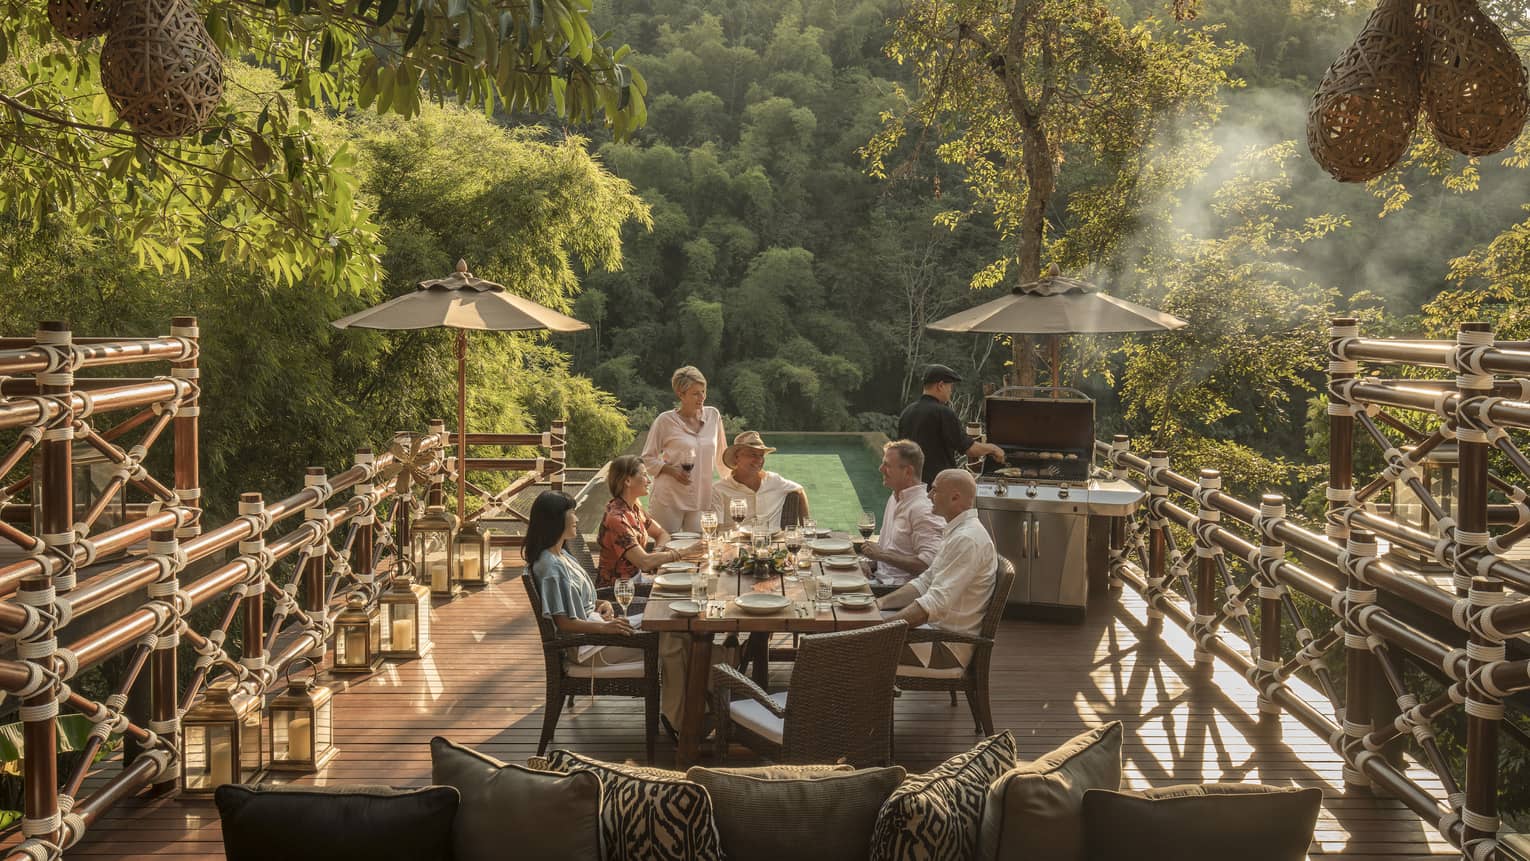 Smiling group of diners at patio table near chef at barbecue, surrounded by jungle